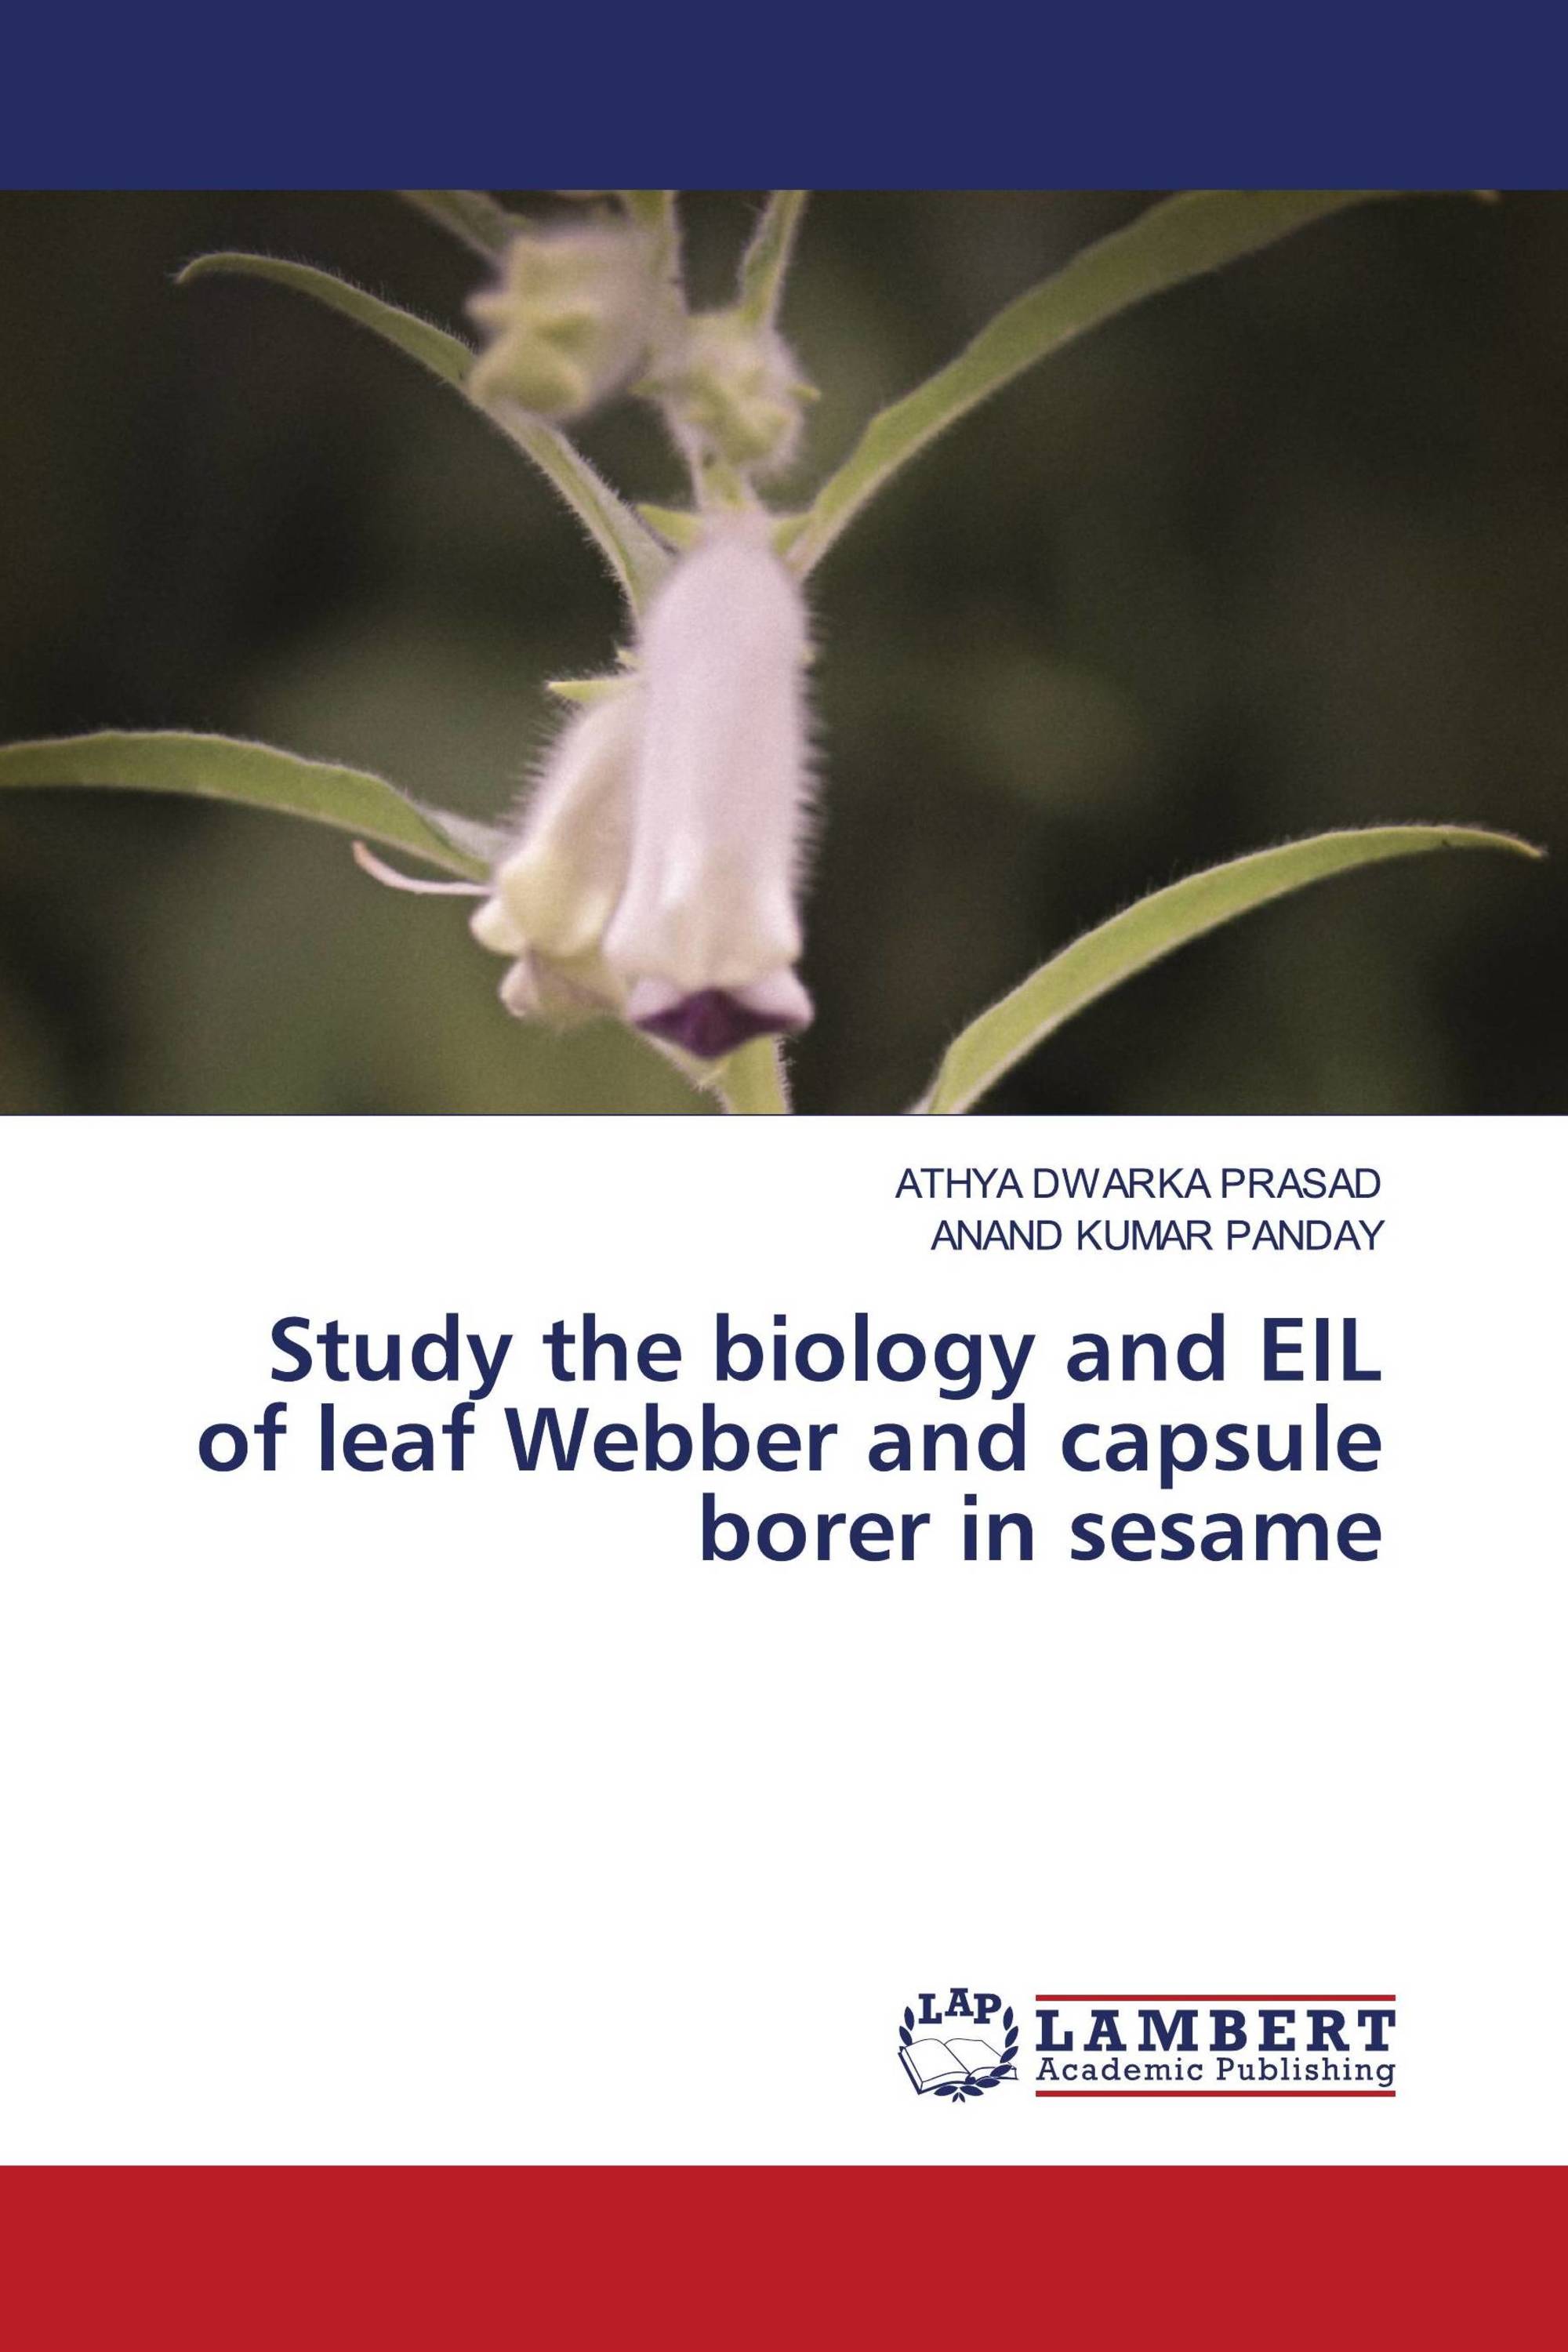 Study the biology and EIL of leaf Webber and capsule borer in sesame ...